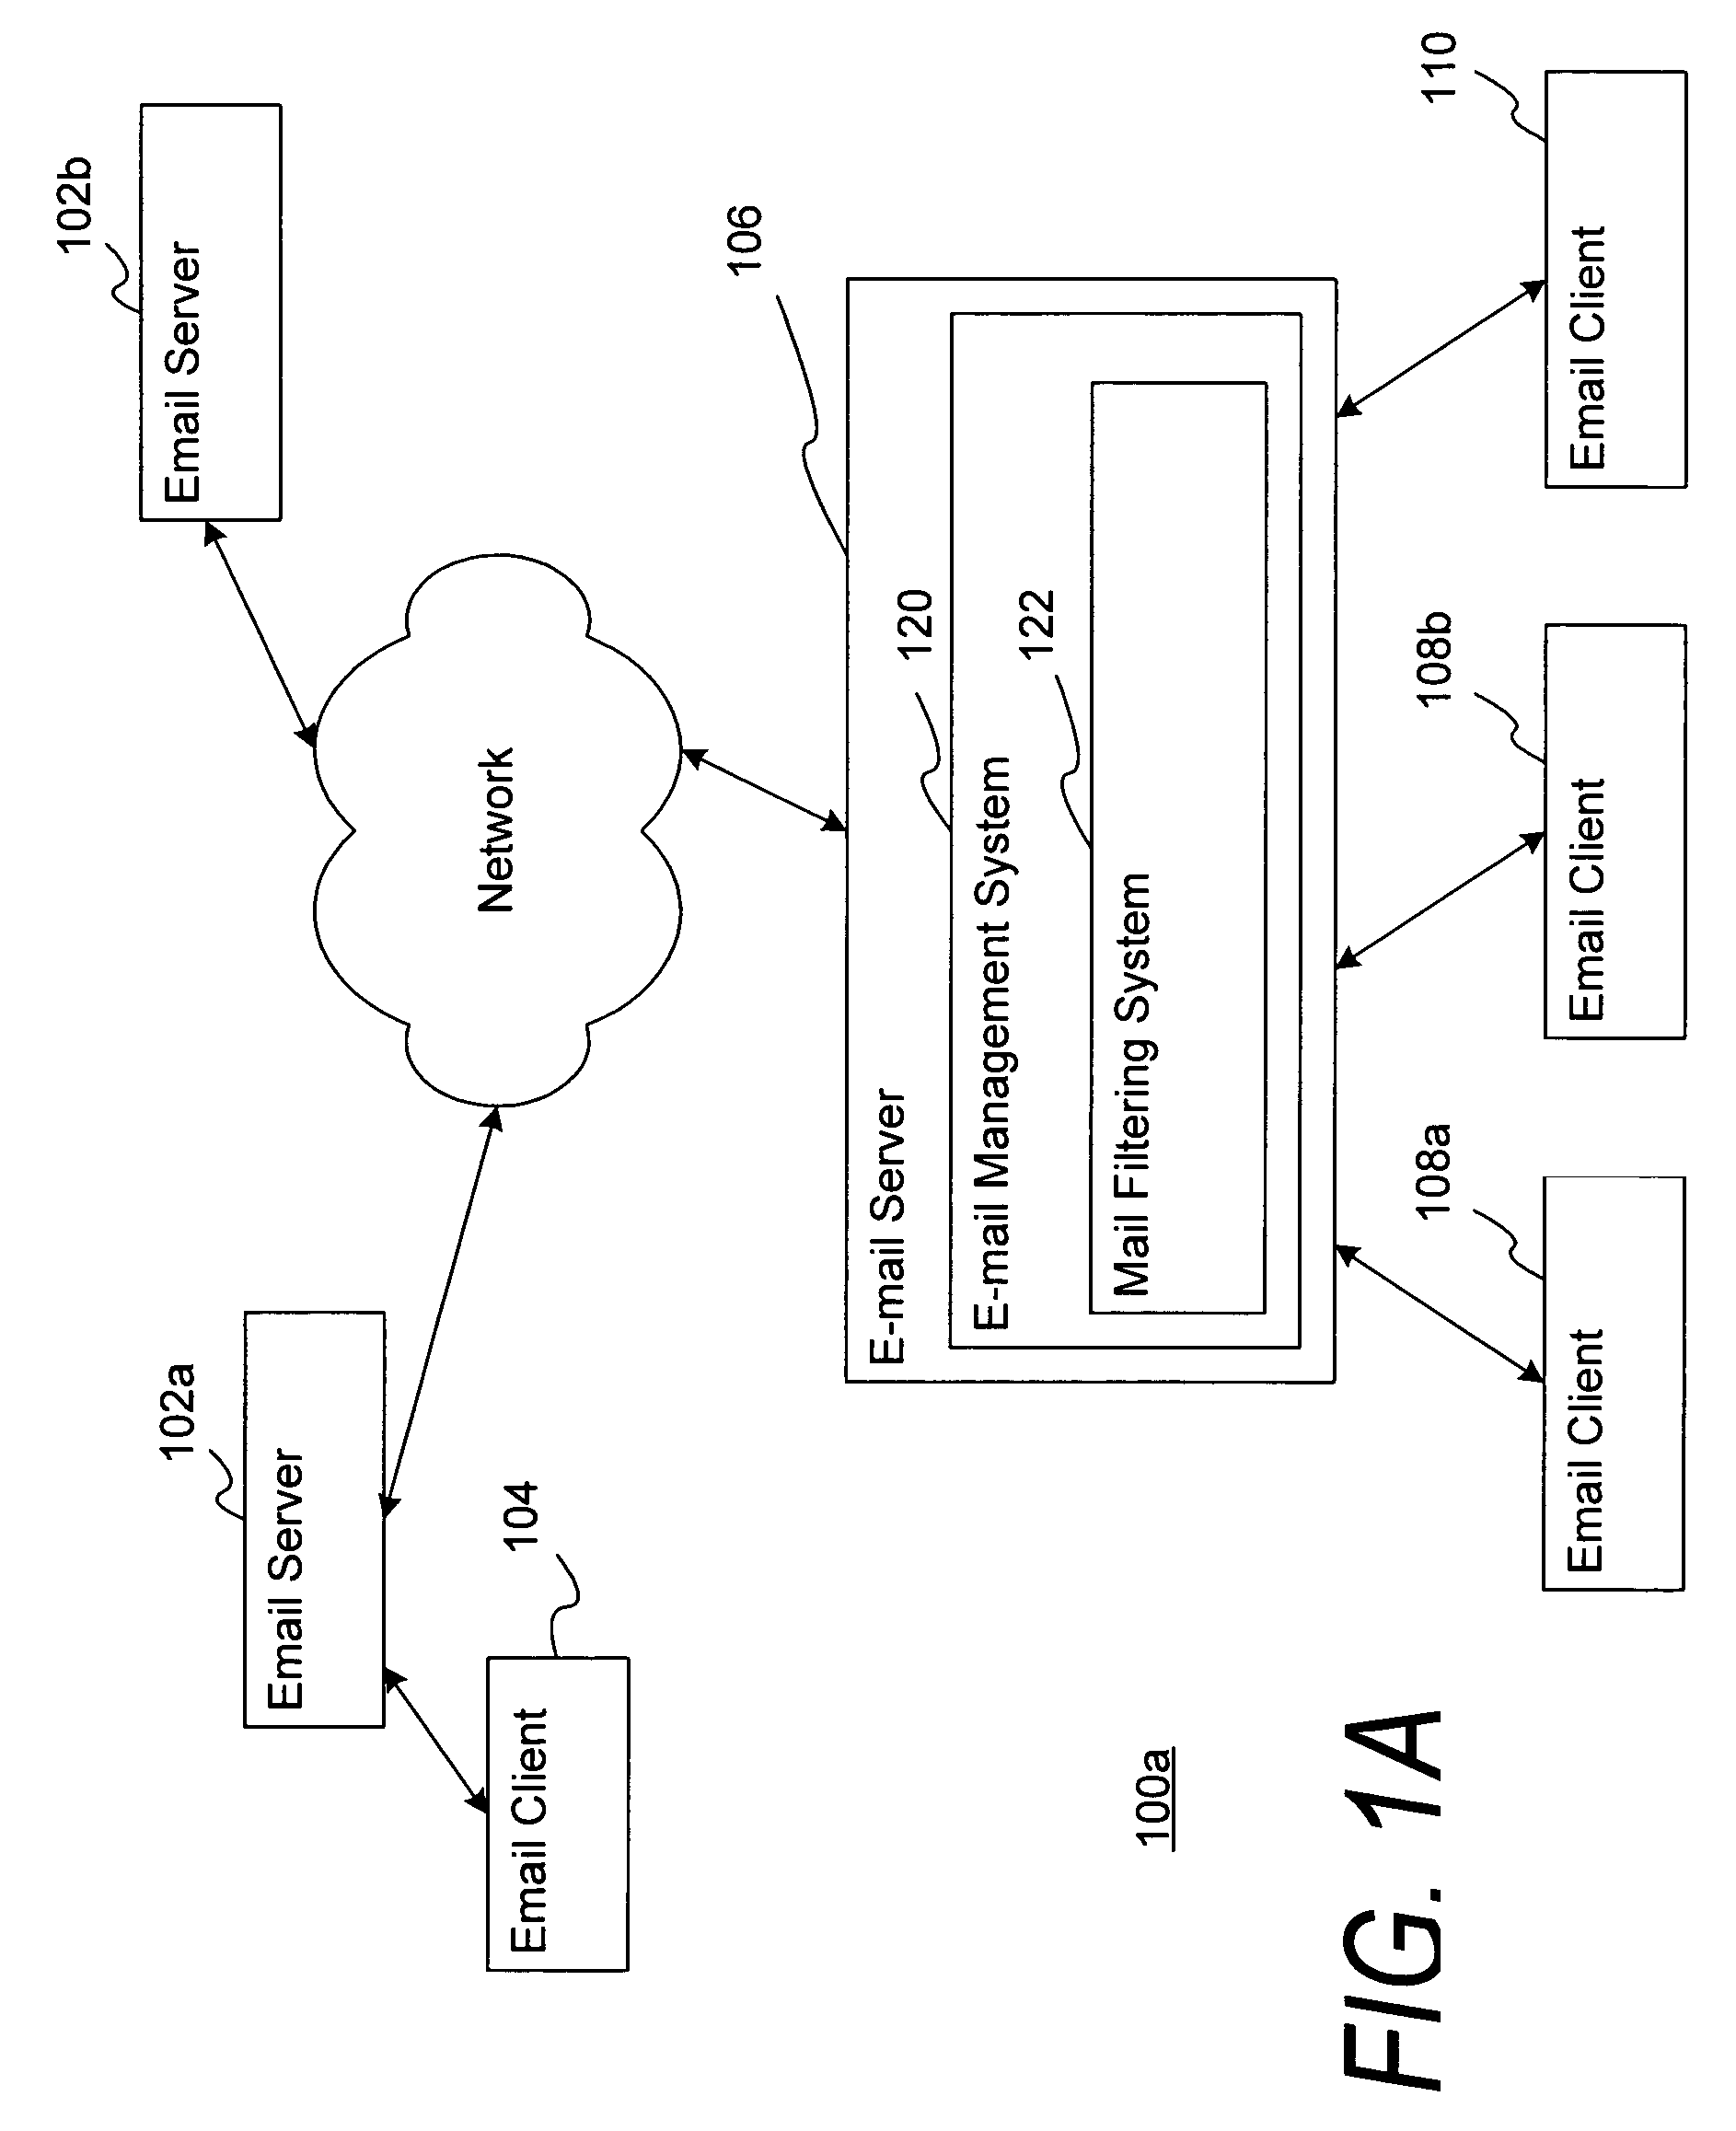 Filtering and managing electronic mail